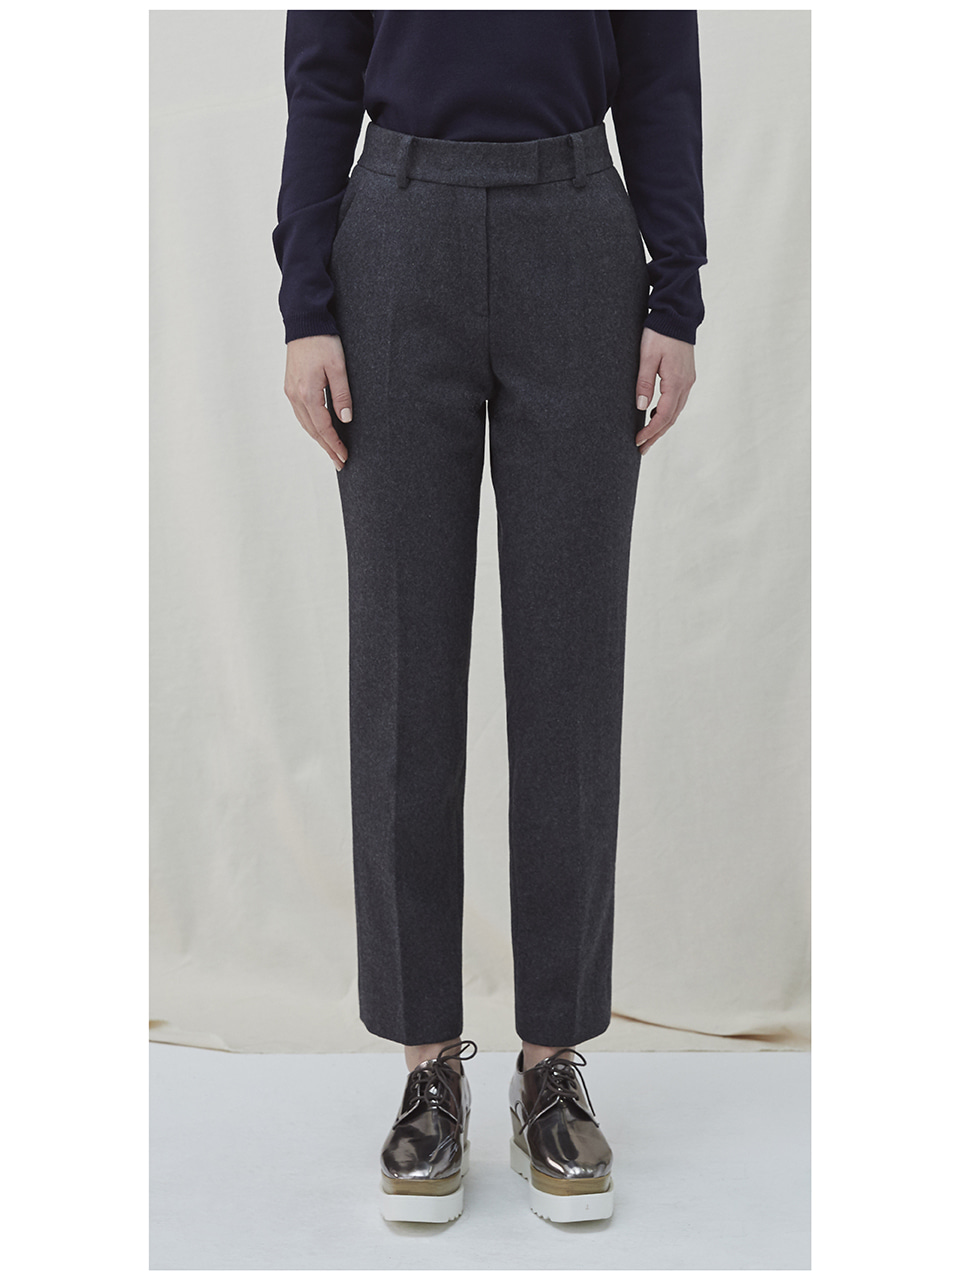 Embroidered Wool Pants - charcoal